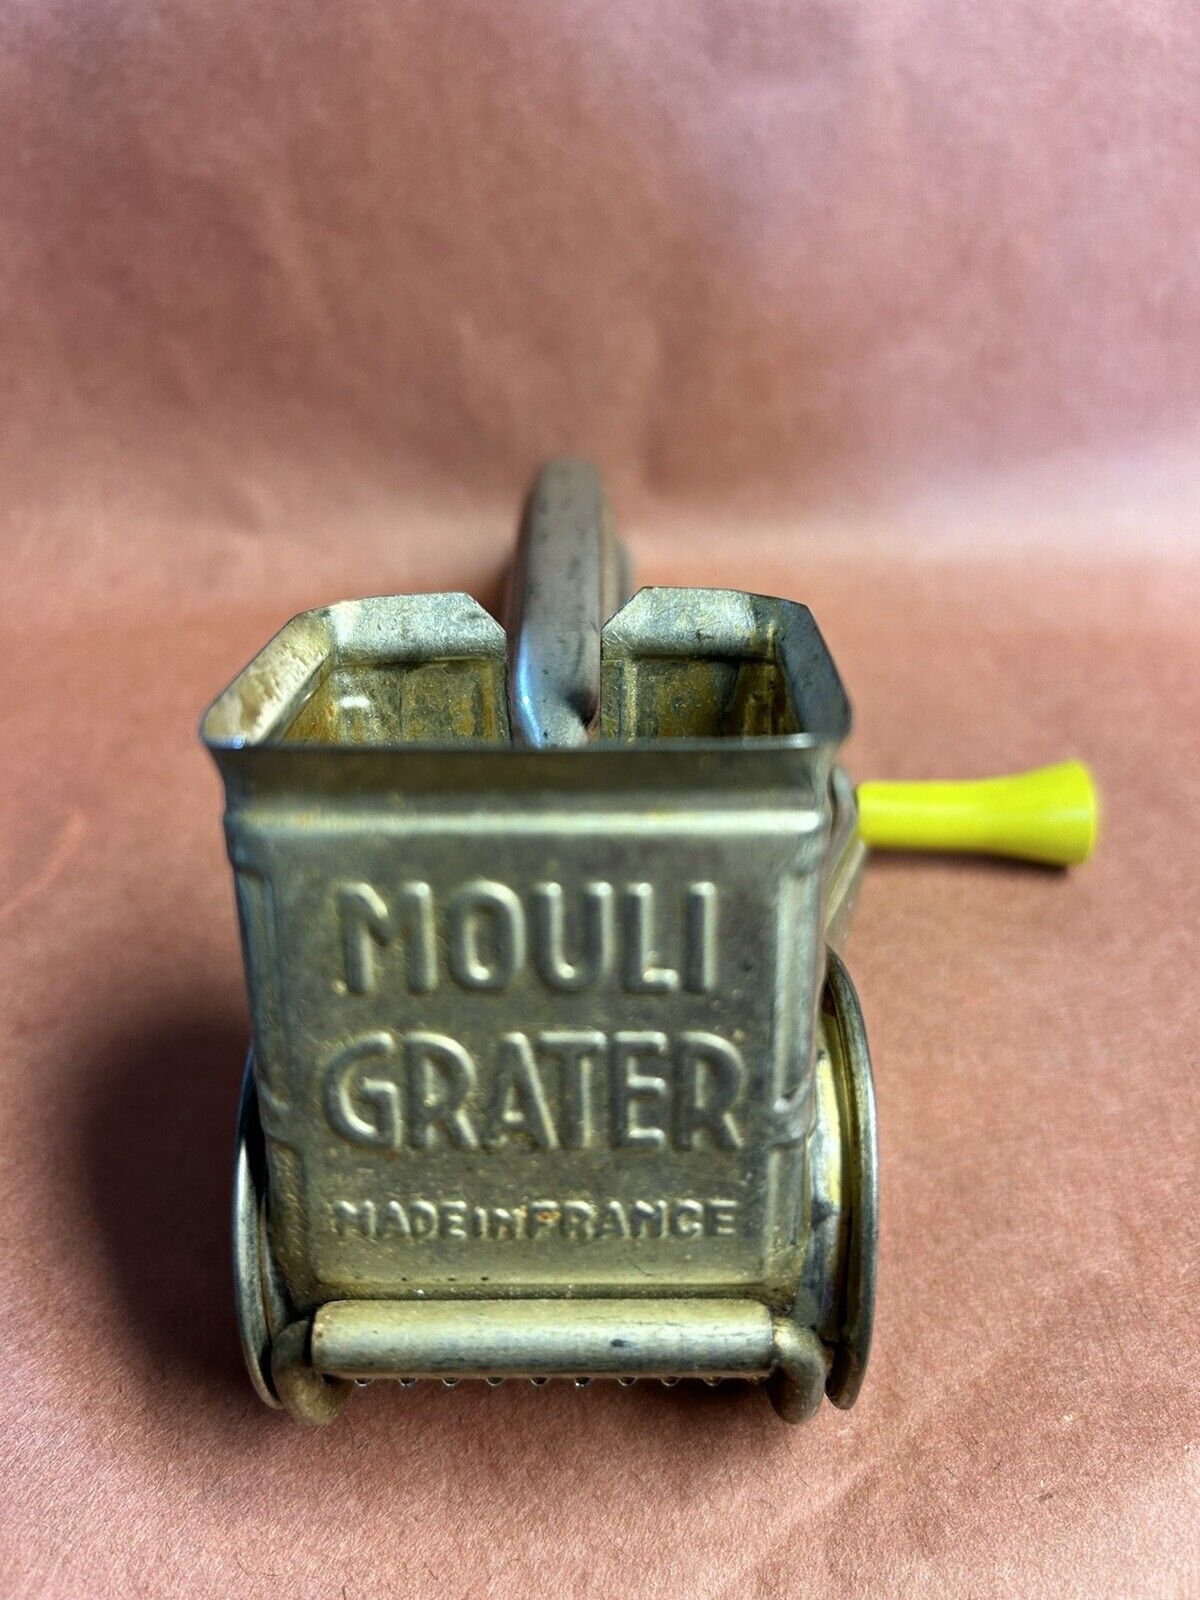 Vintage Mouli Cheese Grater Made in France Tin with Yellow Handle